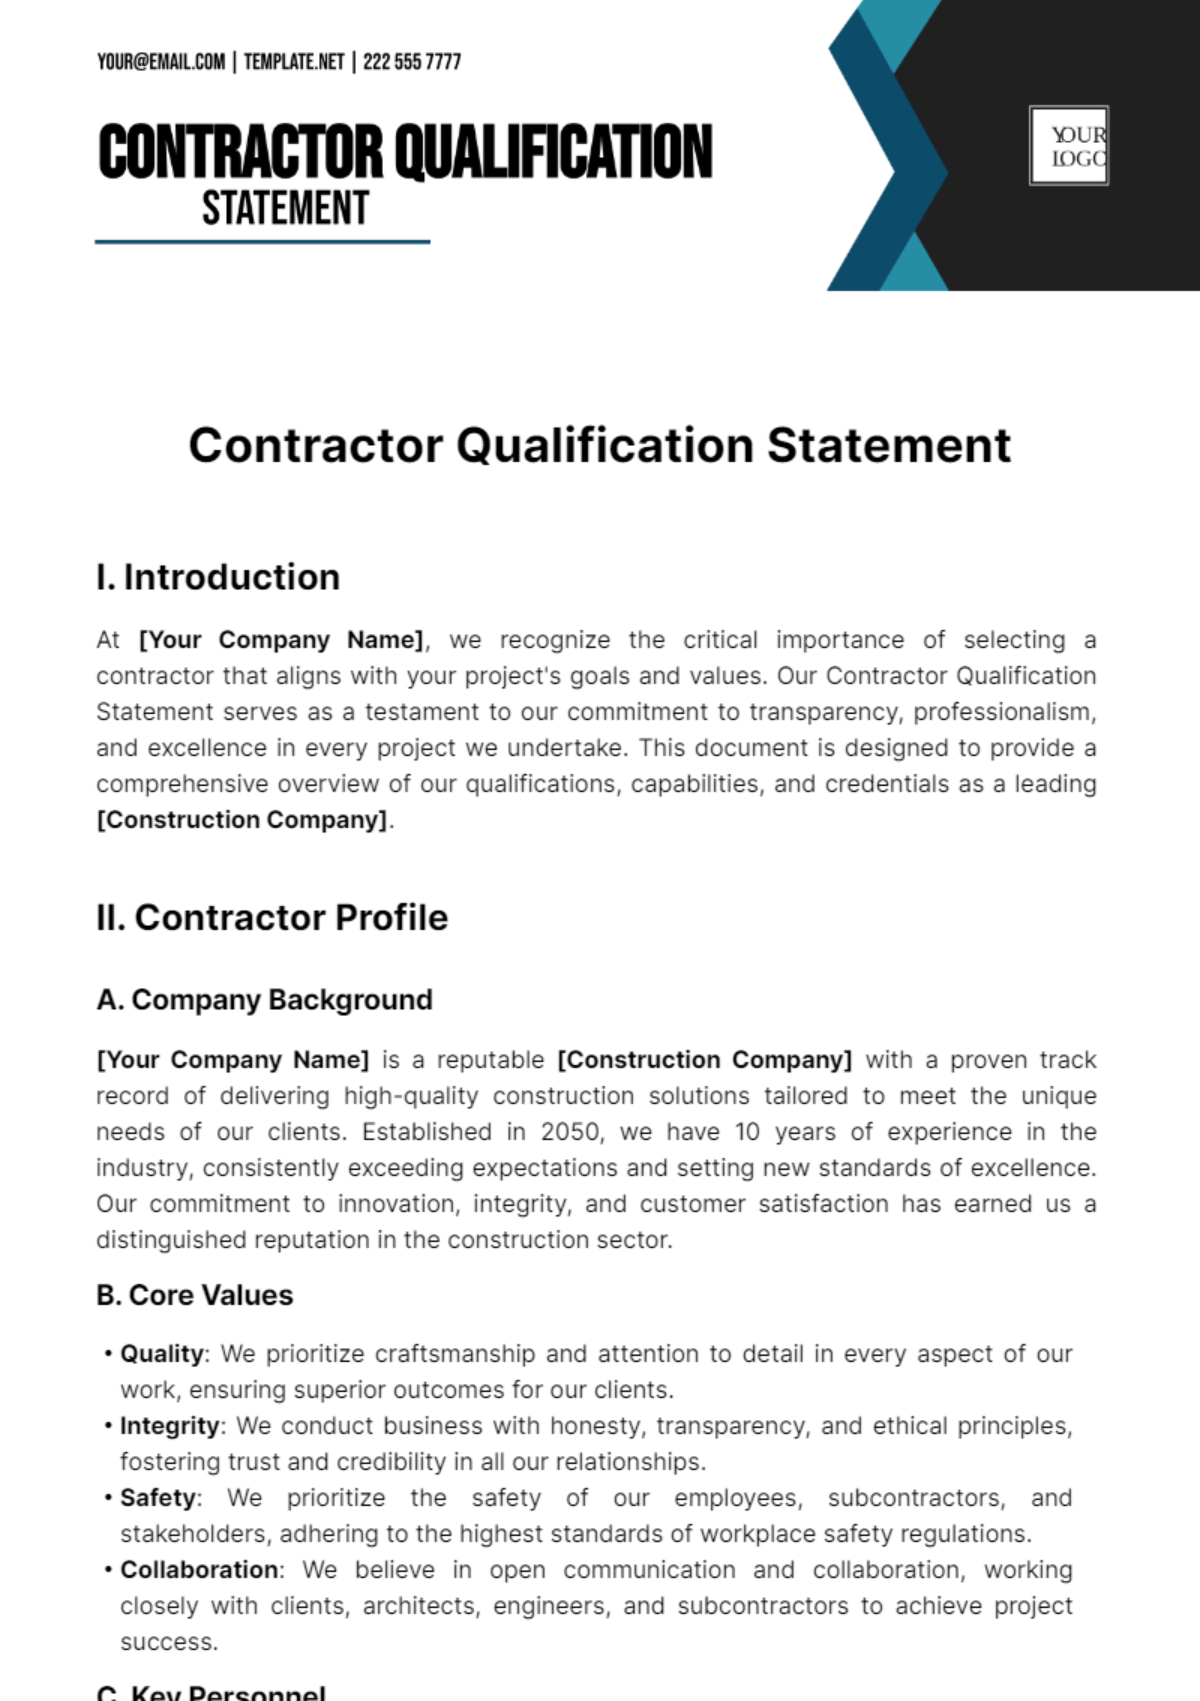 Contractor Qualification Statement Template